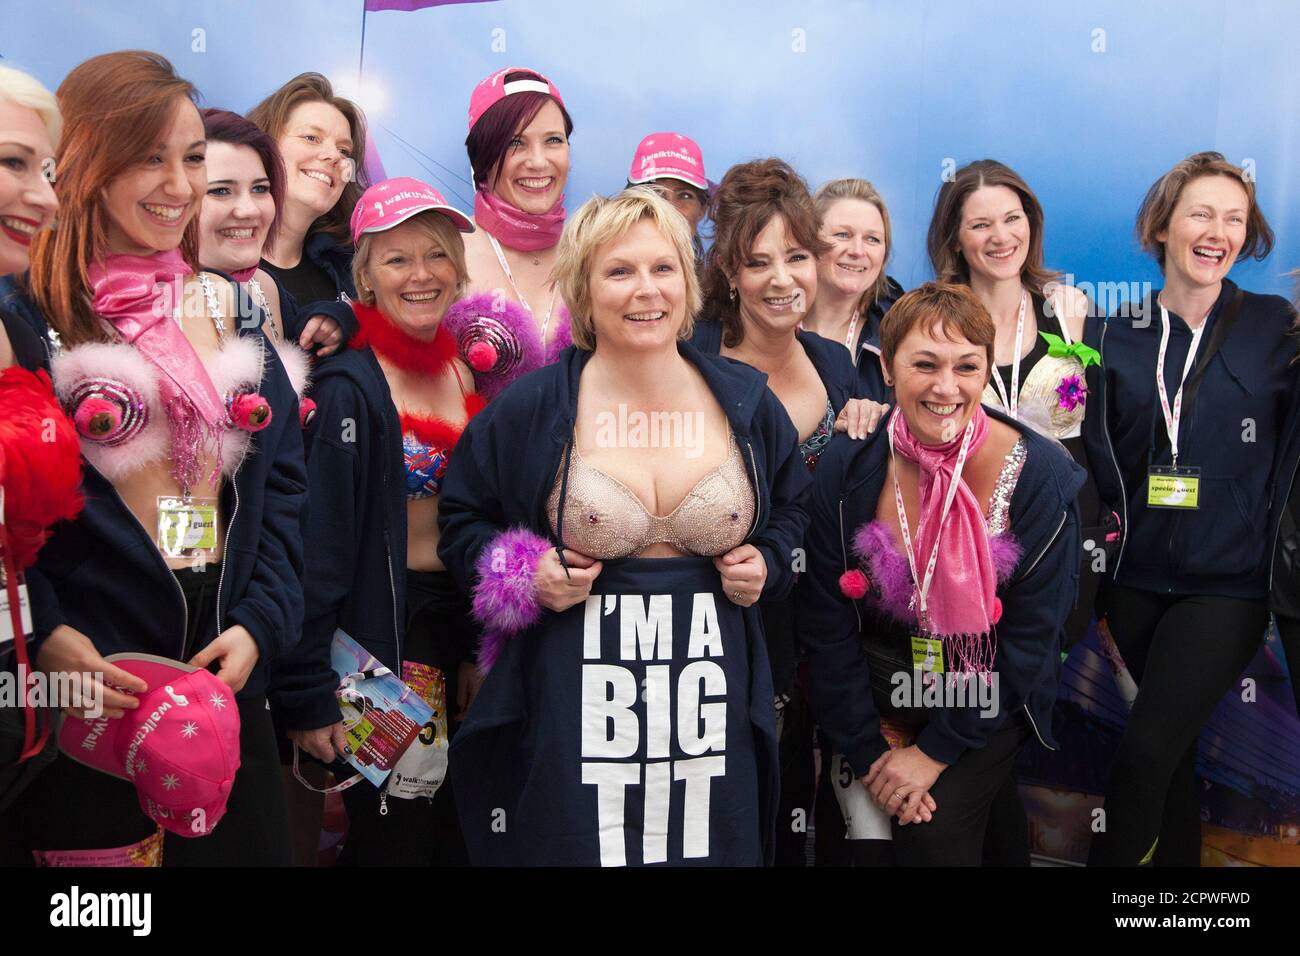 Jennifer Saunders with members of her team (Jen's Big Tits Team). The MoonWalk London 2012, Celebrating 15 years of Moon Walking for the breast cancer charity 'Walk the Walk'. Stock Photo